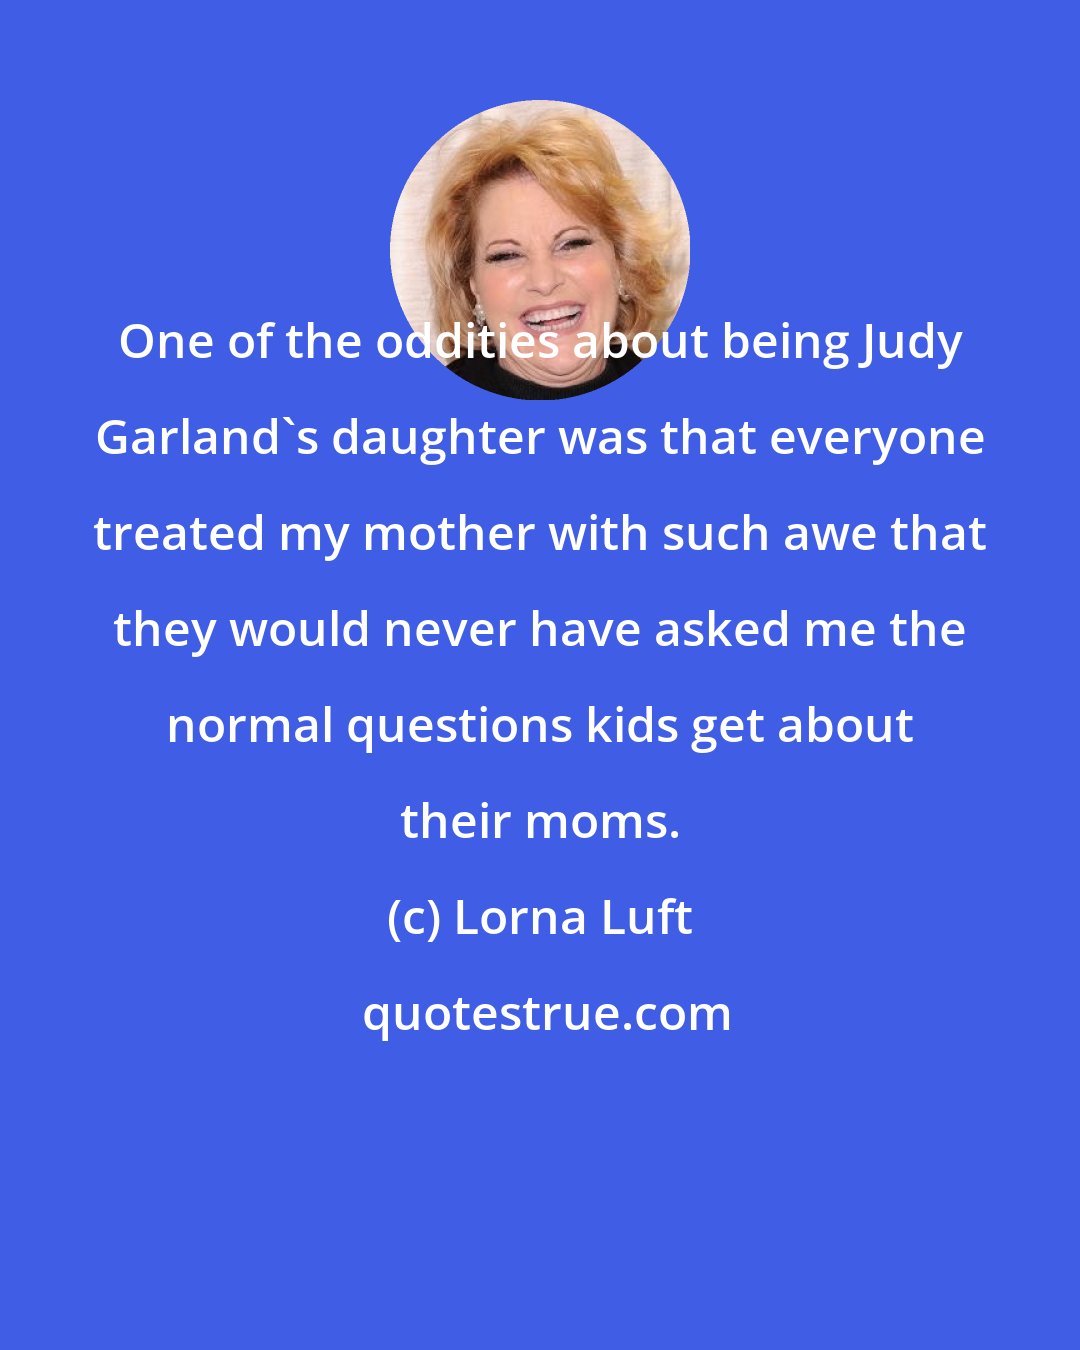 Lorna Luft: One of the oddities about being Judy Garland's daughter was that everyone treated my mother with such awe that they would never have asked me the normal questions kids get about their moms.